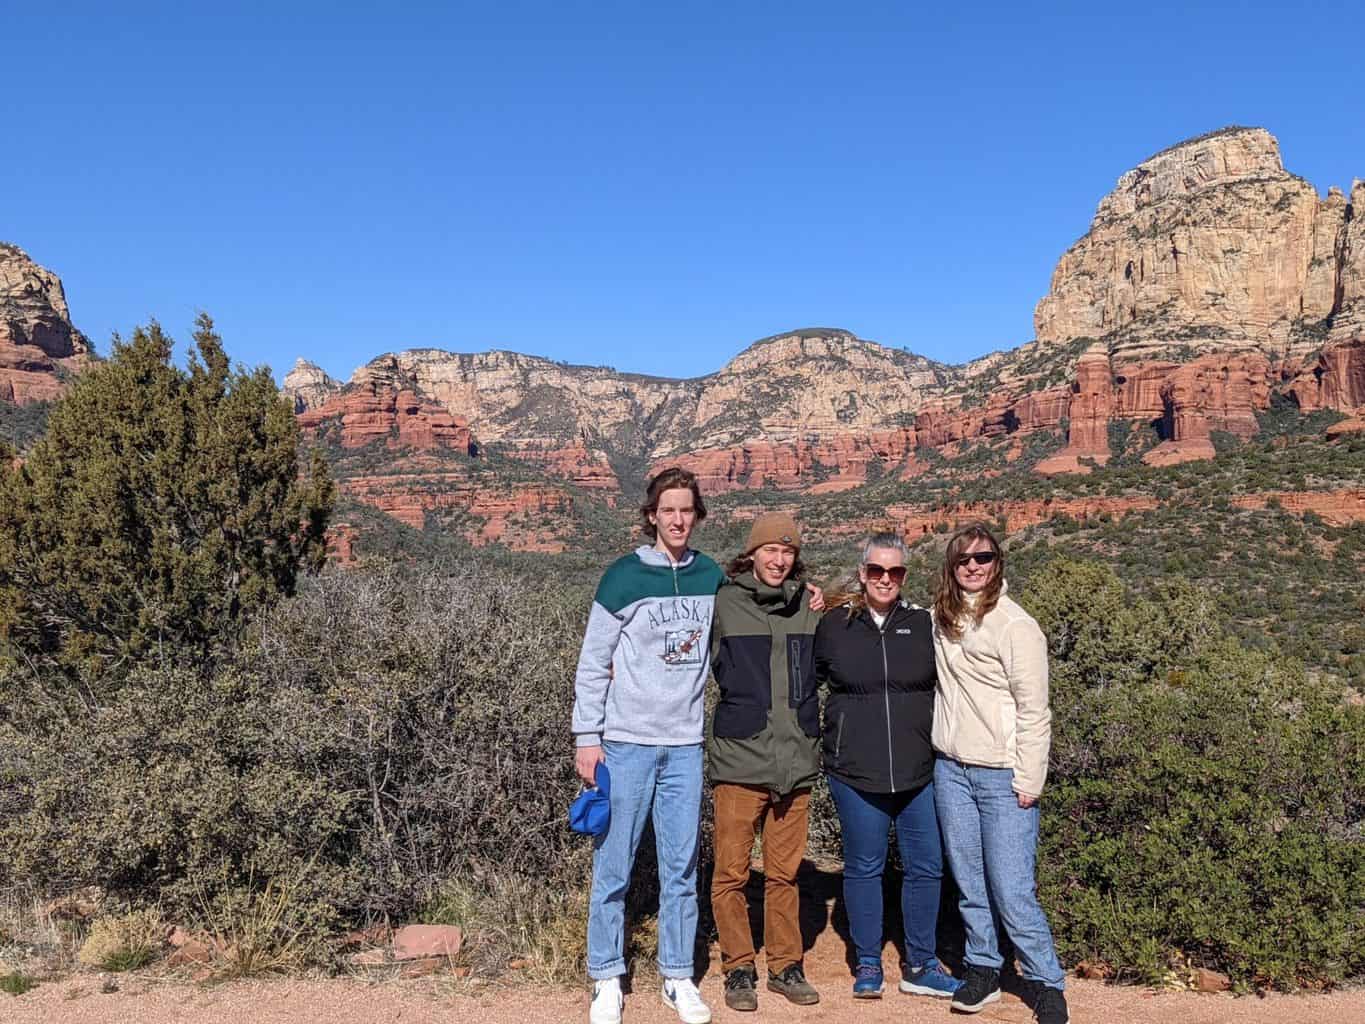 Judy, a former massage therapist, and her family hiking 